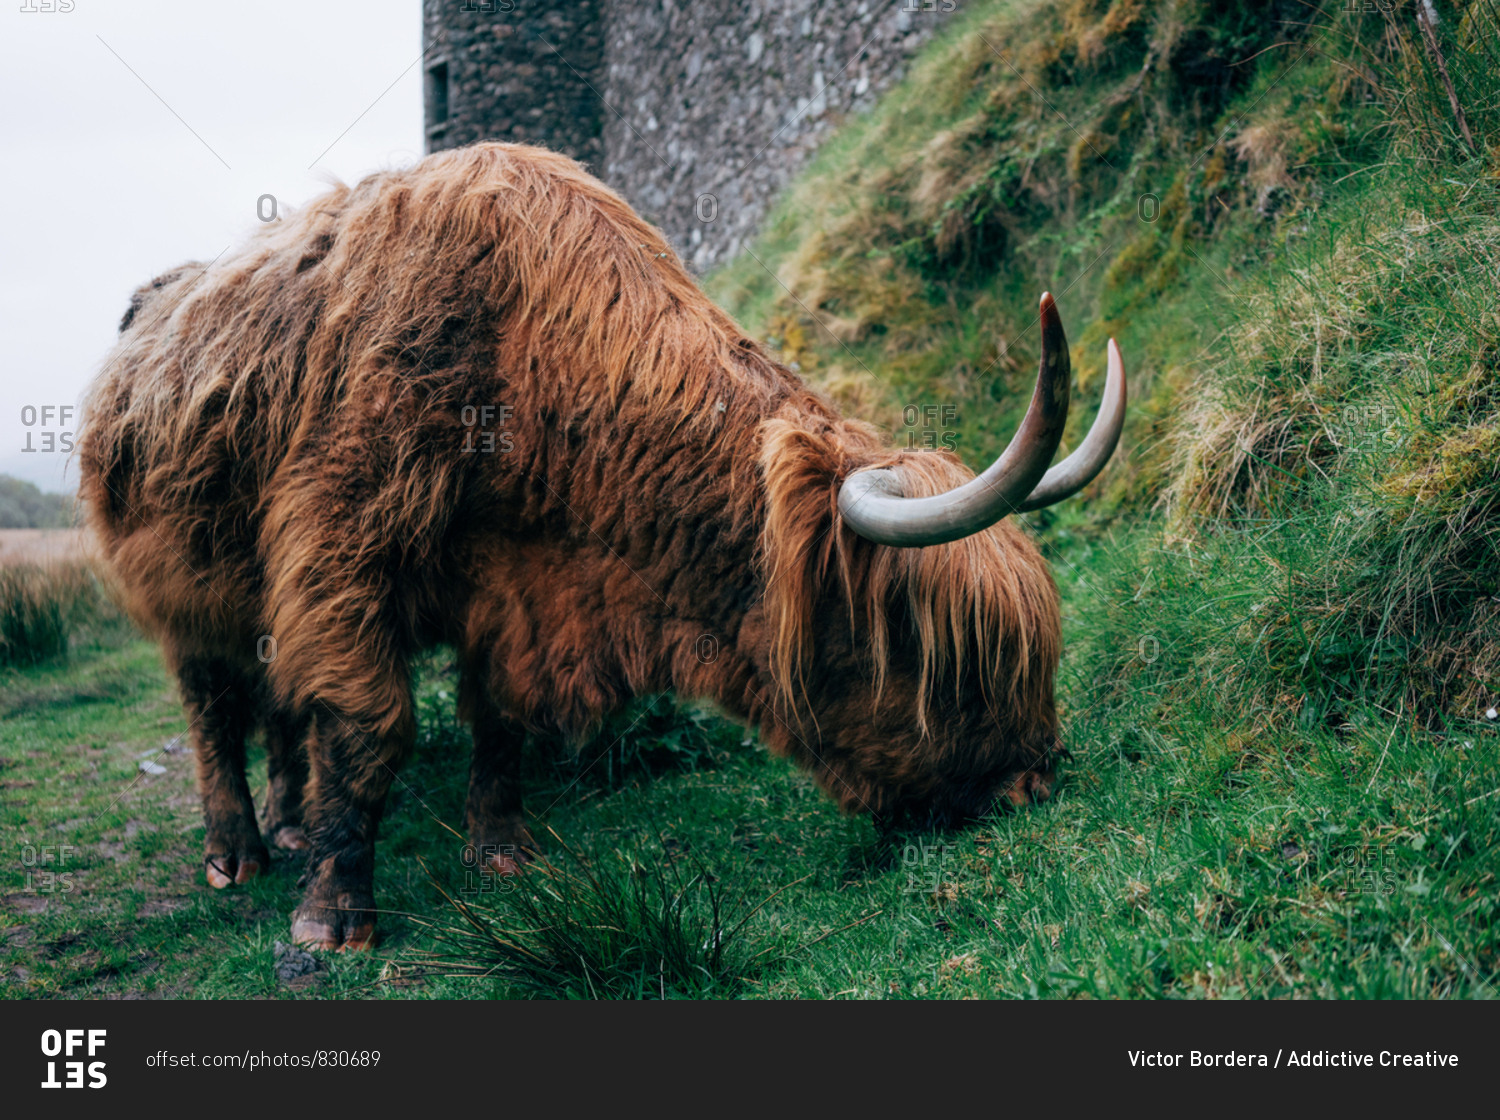 Huge ginger yak feeding on green lawn against aged stone building, Scotland